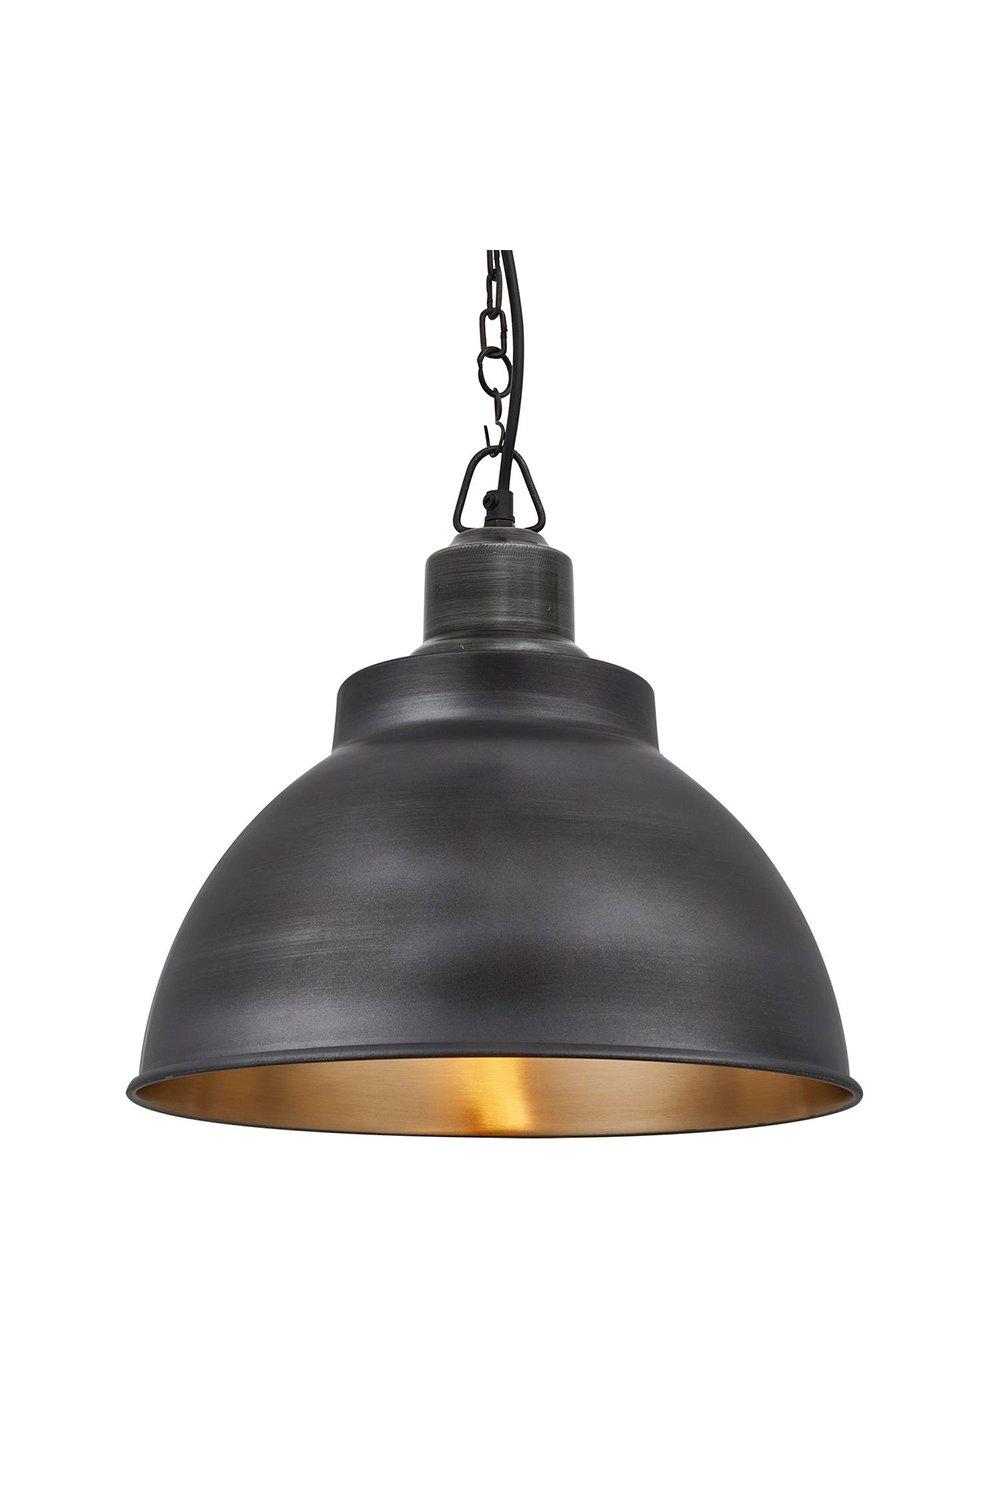 Brooklyn Dome Pendant, 13 Inch, Pewter & Brass, Pewter Chain Holder